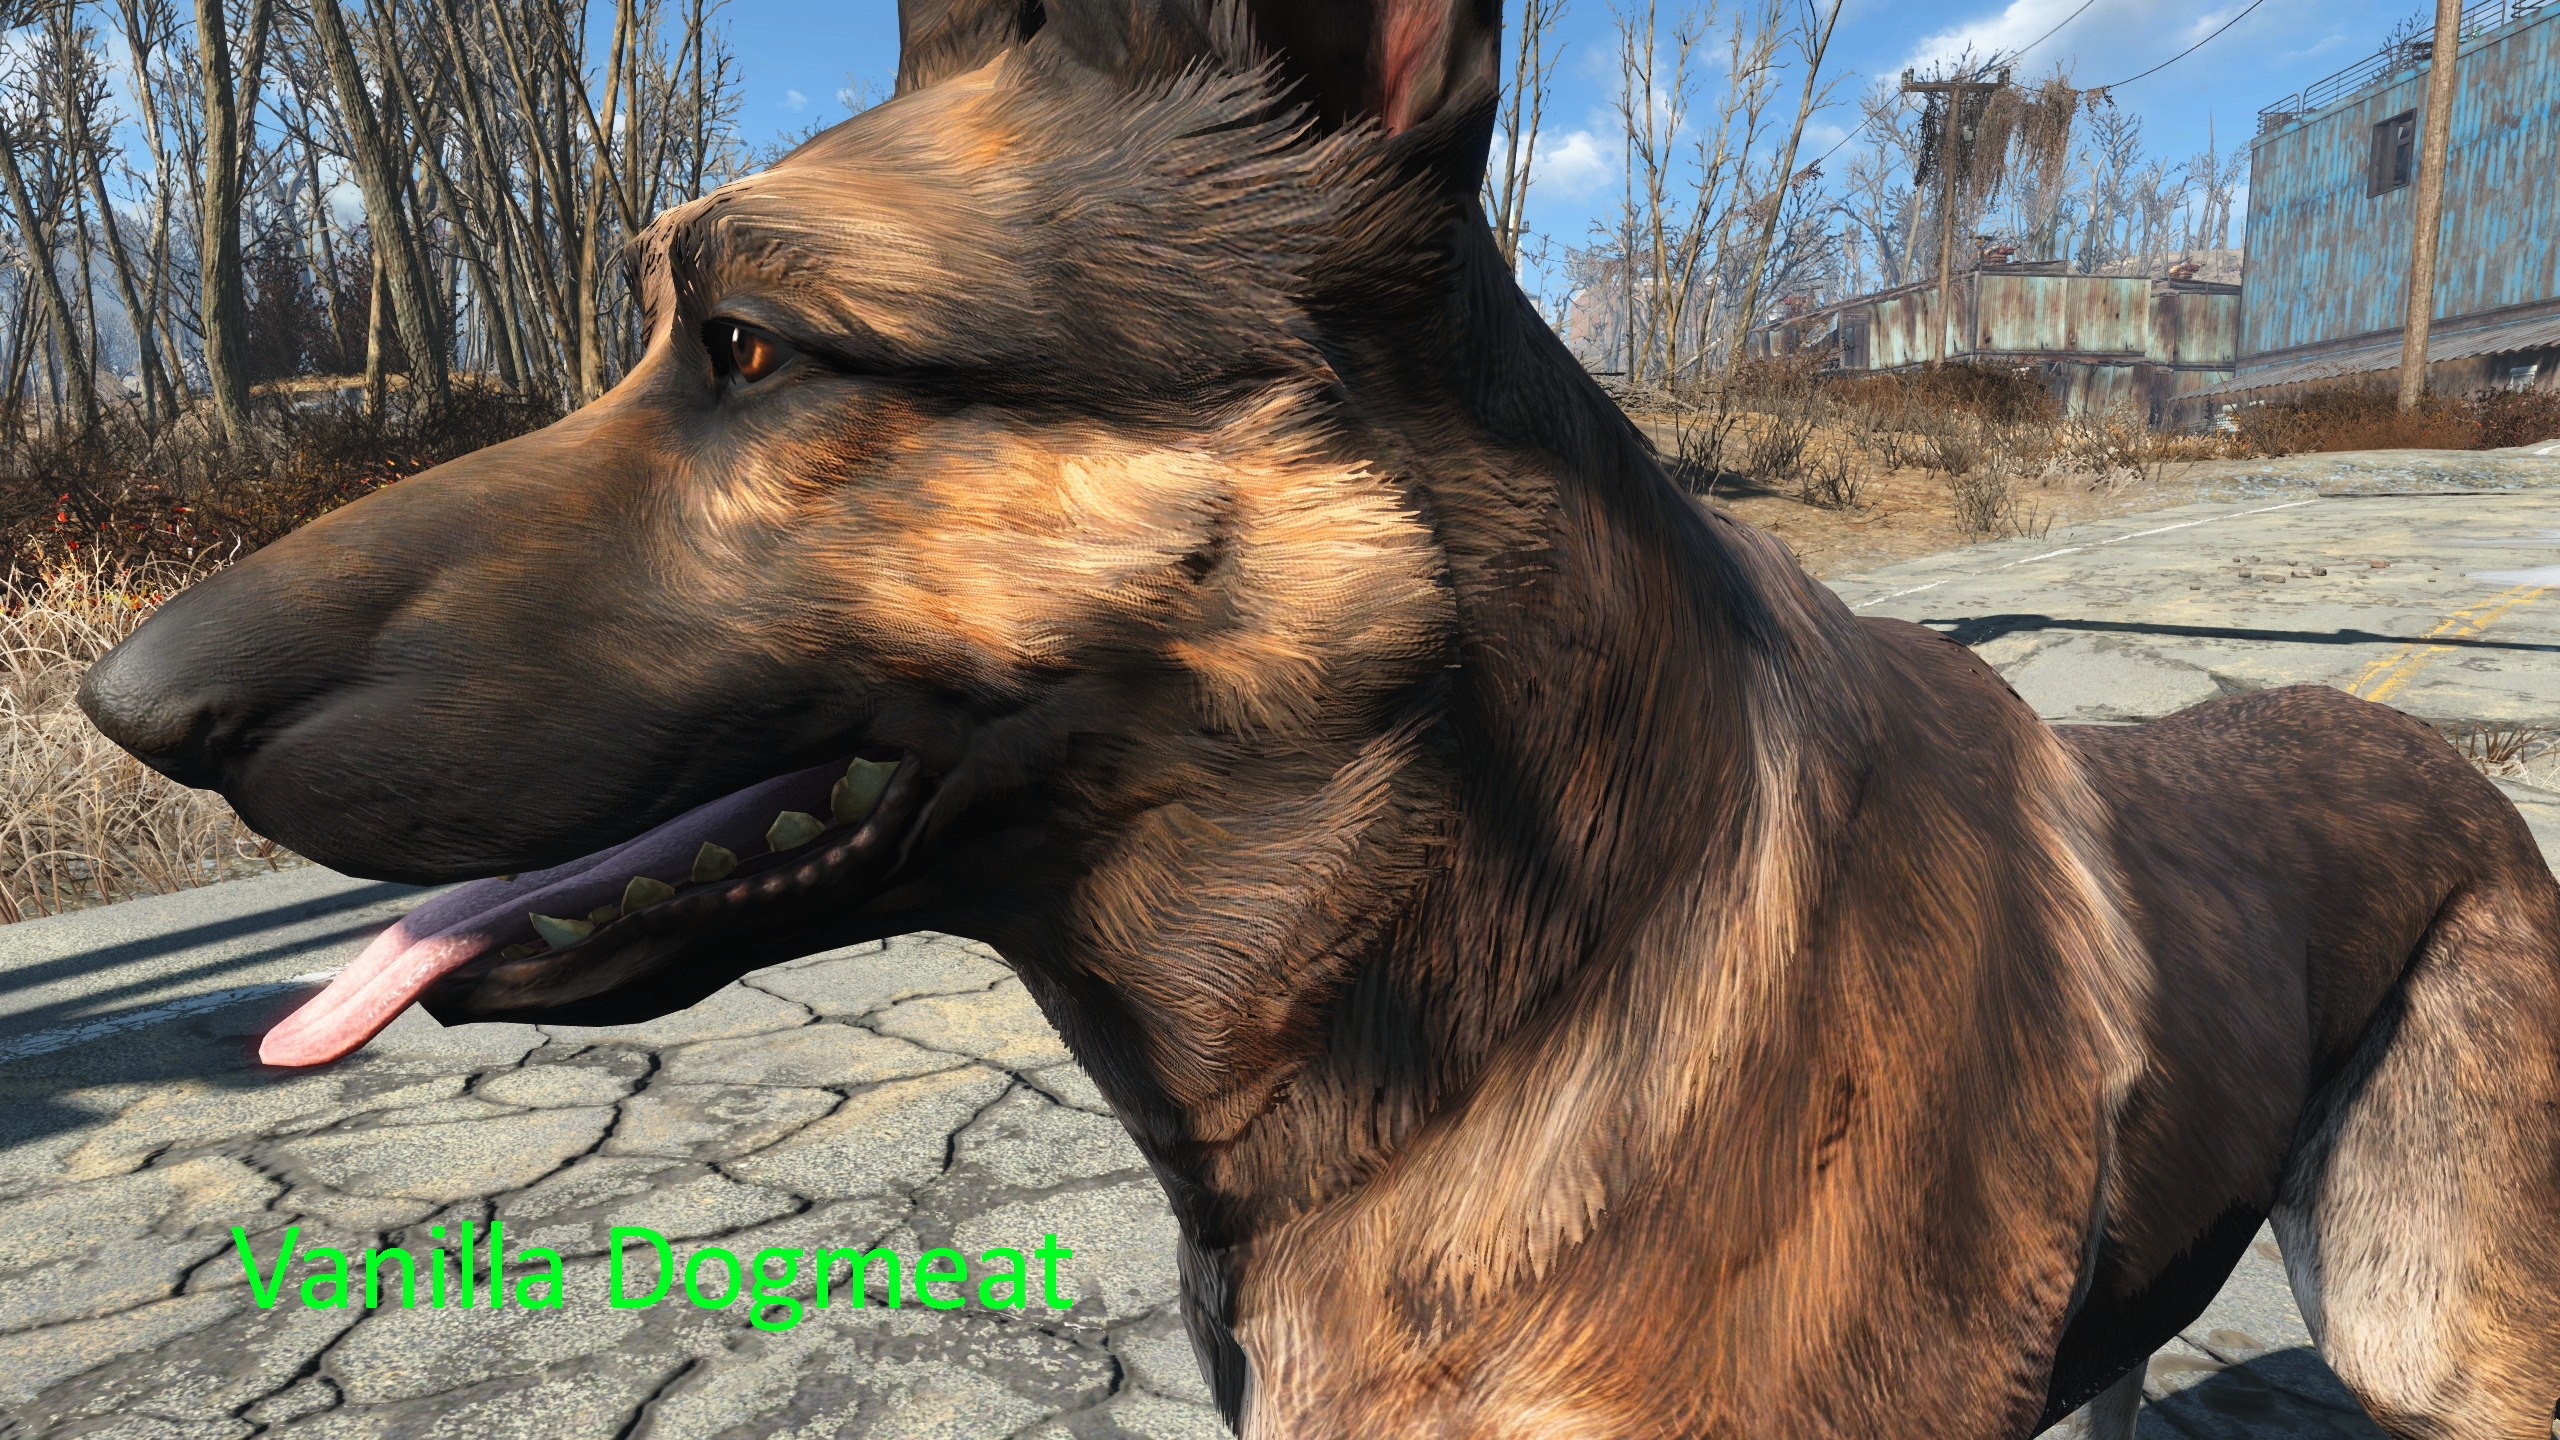 Image 9 - 4K Dogmeat mod for Fallout 4 - Mod DB